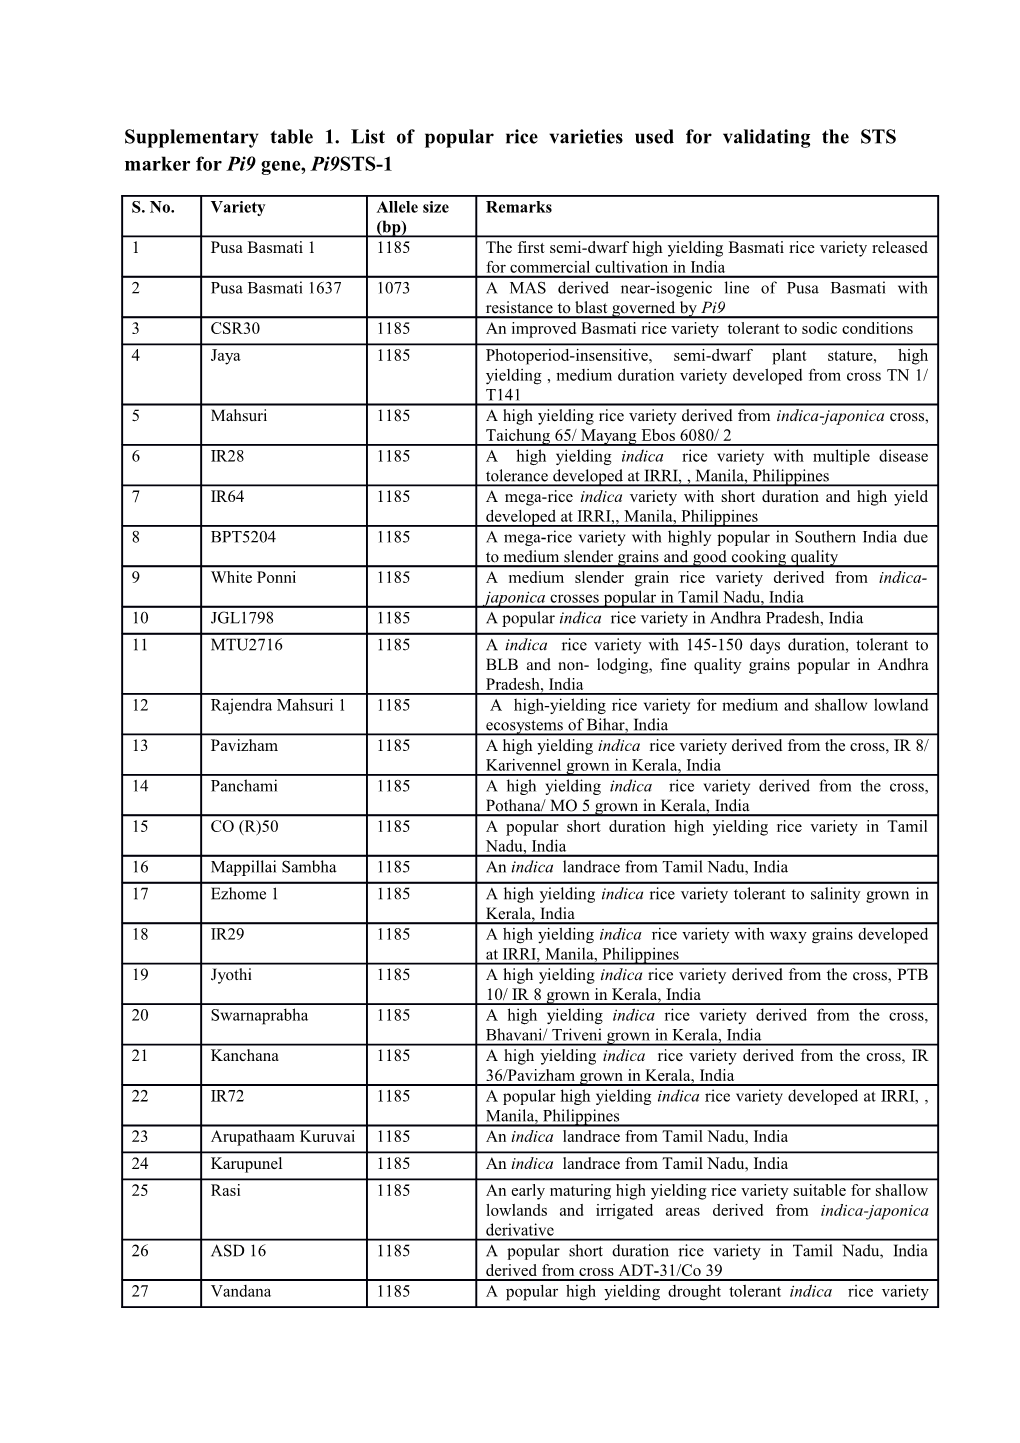 Supplementary Table 1. List of Popular Rice Varieties Used for Validating the STS Marker